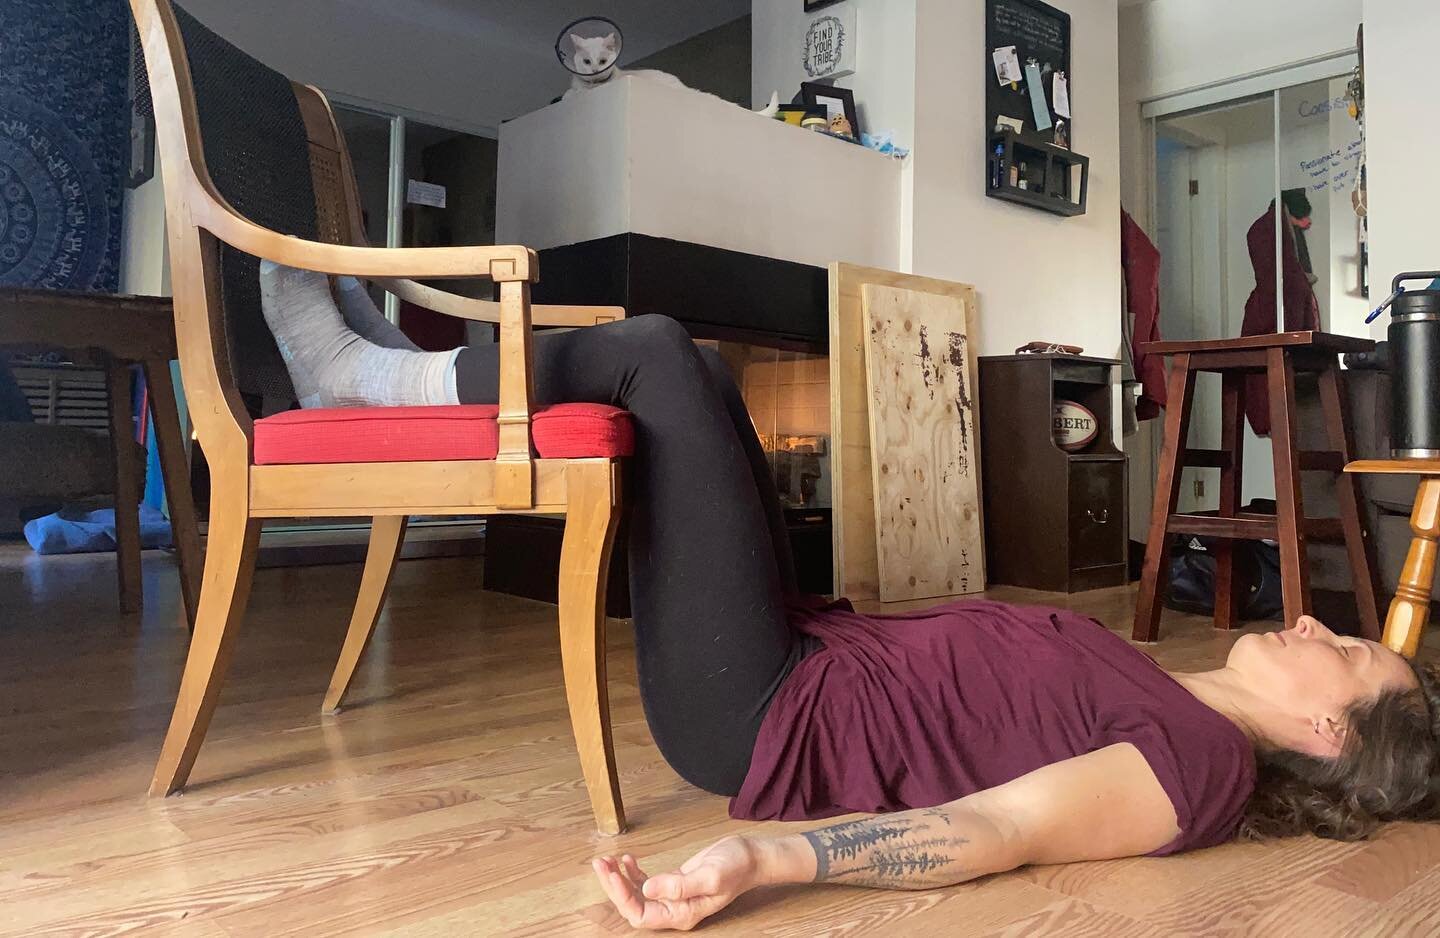 Let&rsquo;s play a little game....

Eye spy with my little eye something that is cute... can you spot the cat? 🐈 

Ok, now on to why I&rsquo;m laying like this...

I lay in this position for 2 reasons:

1) Let gravity take over my physical body.
2) 